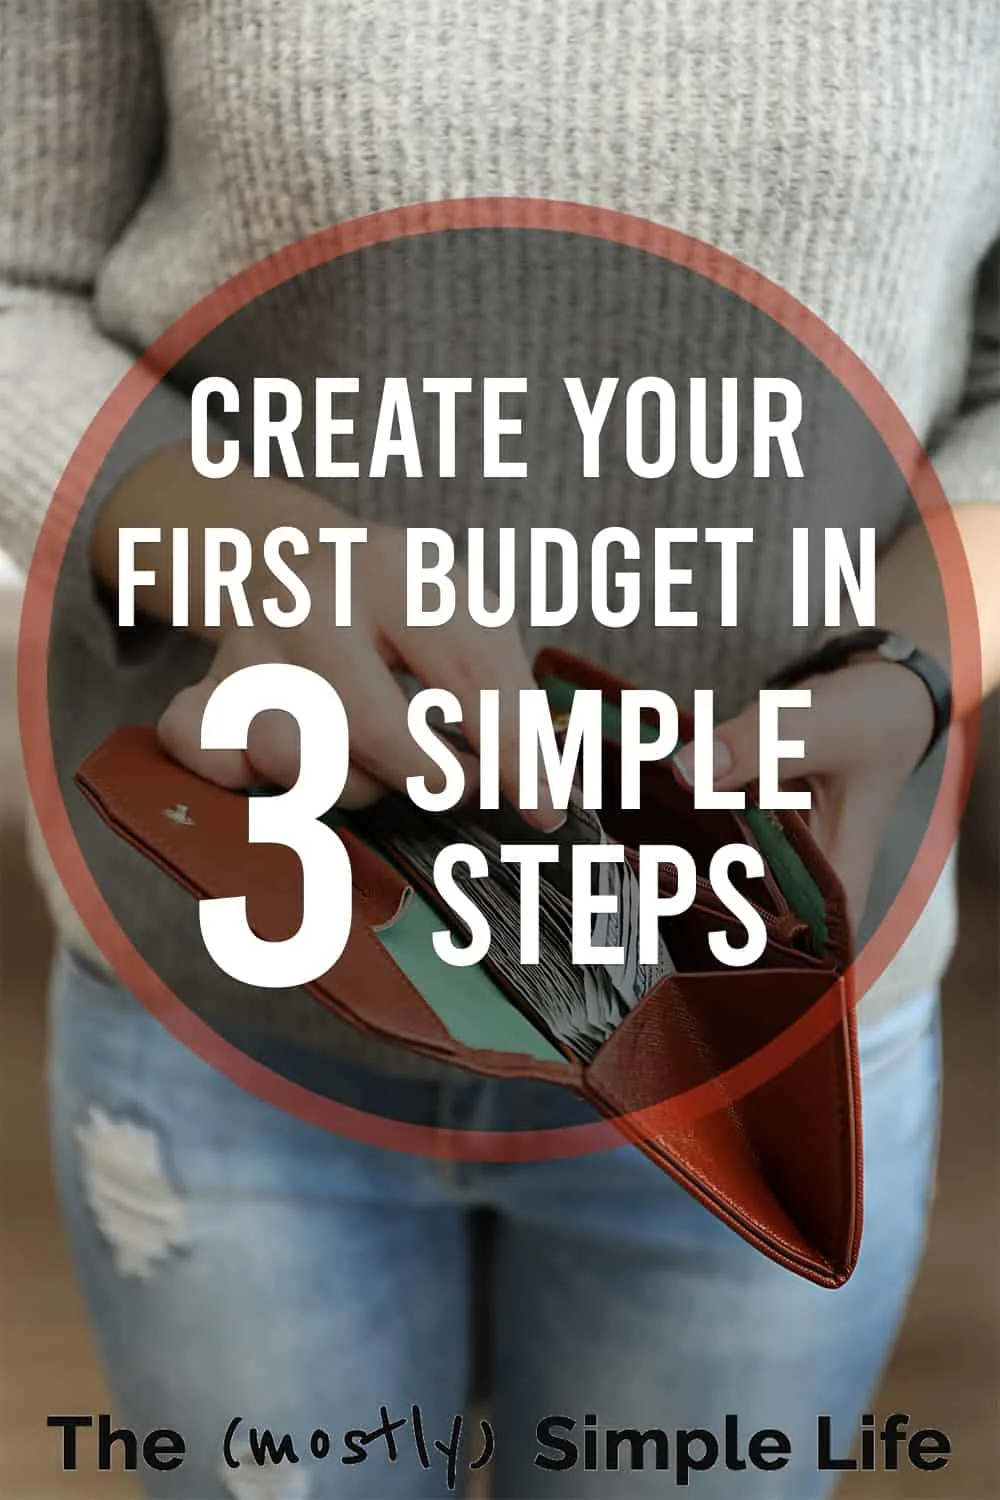 How to make your budget: 3 simple steps